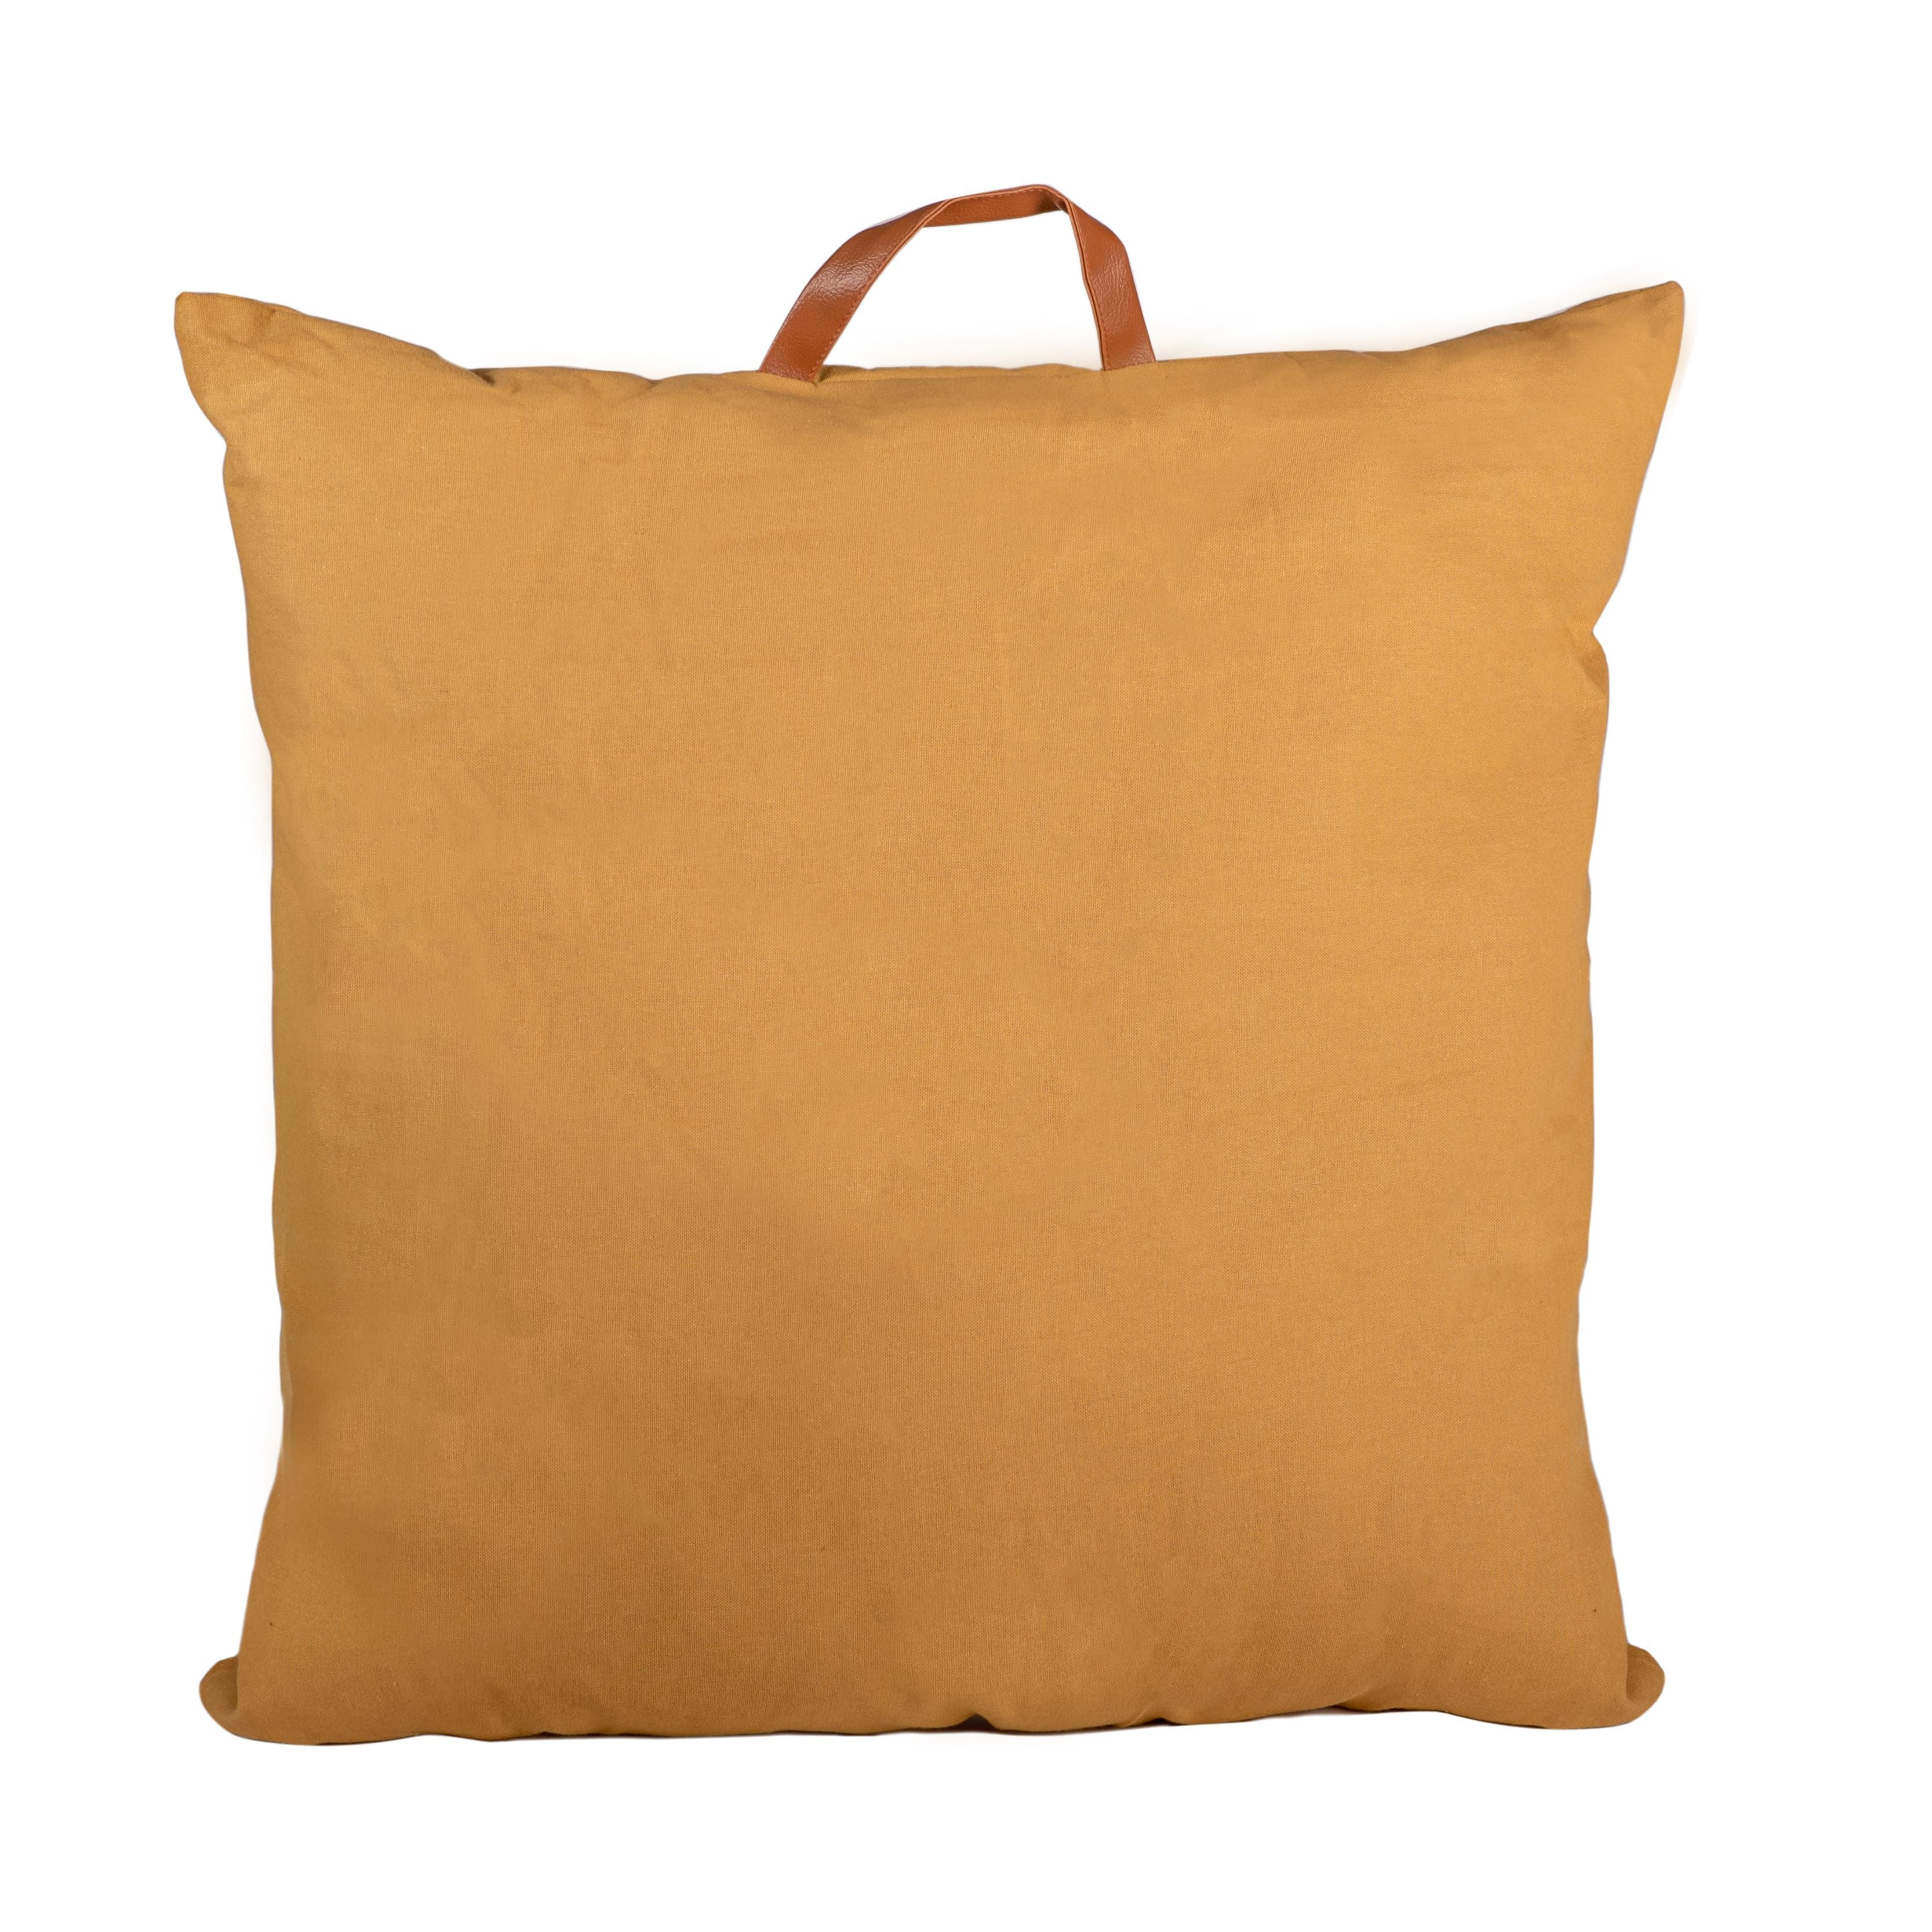 FLOOR CUSHION MUSTARD 60X60 WITH LEATHER HANGER